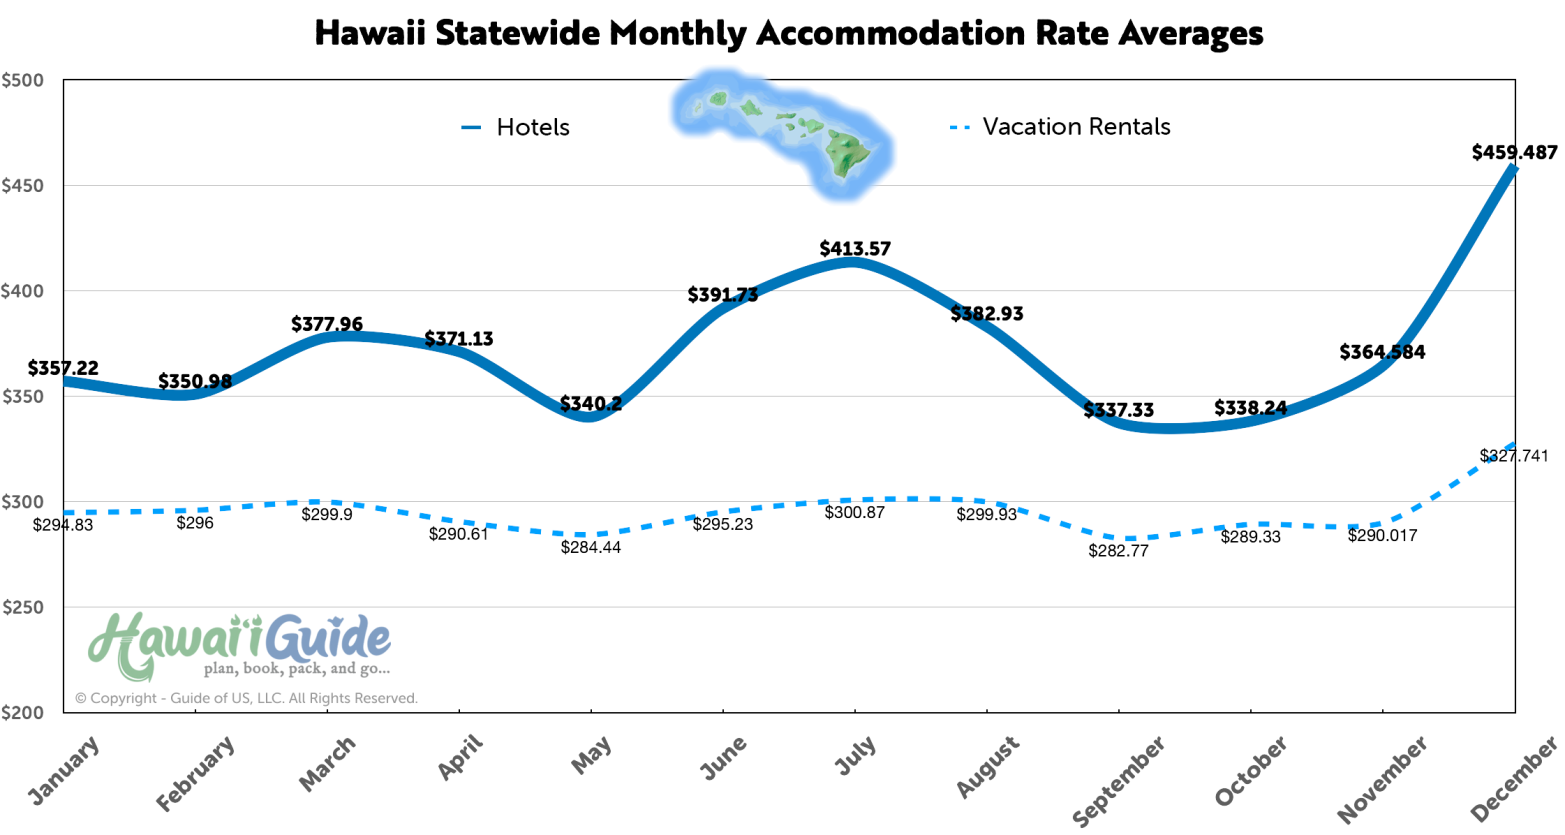 Hawaii Statewide Hotel & Vacation Rental prices in 2022